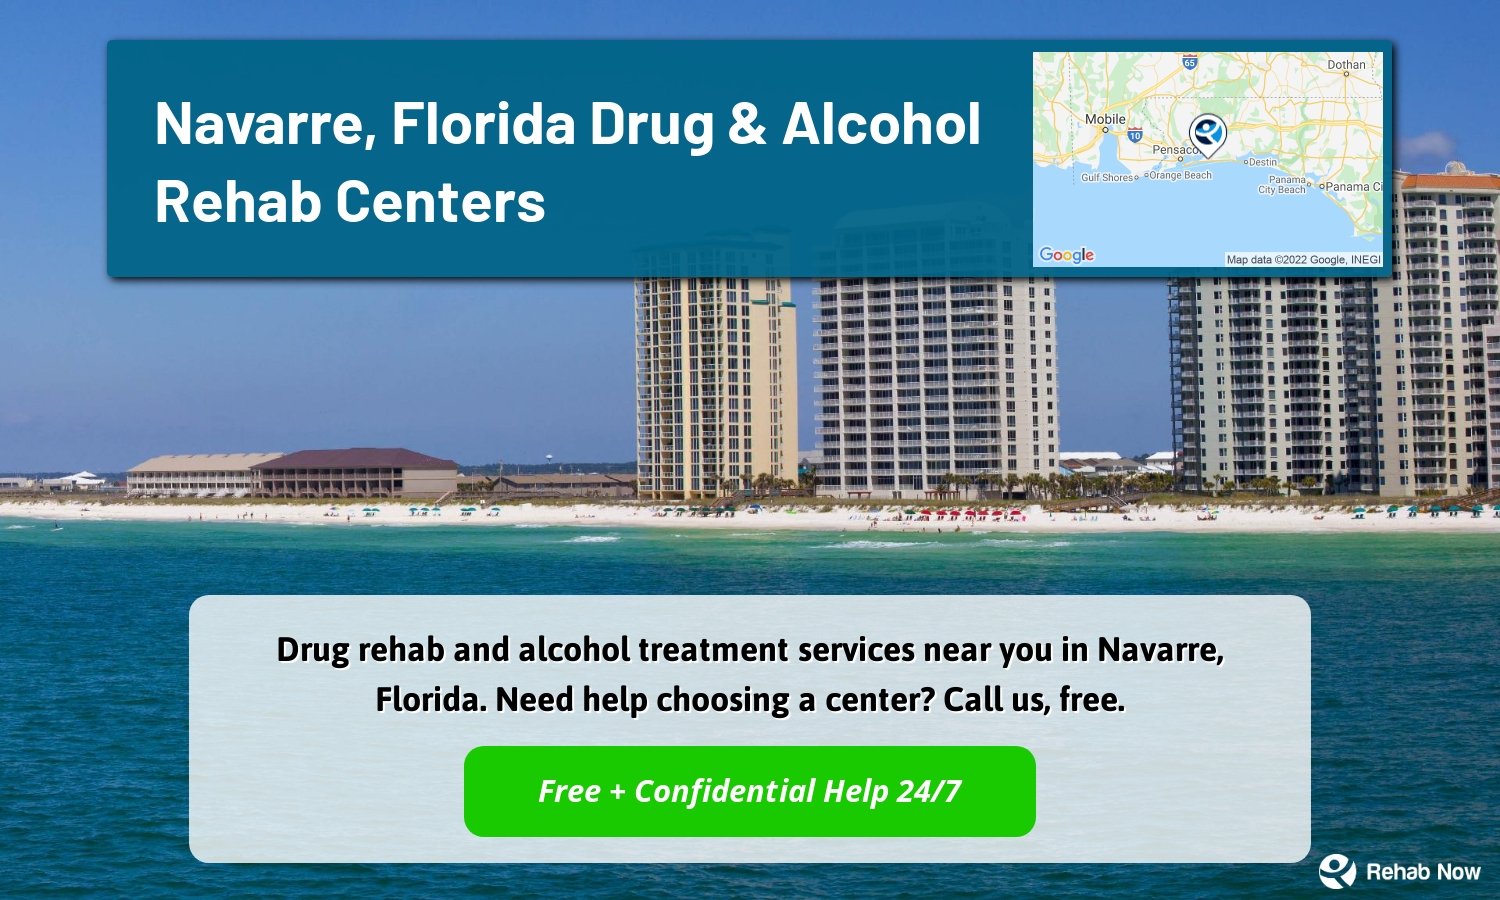 Drug rehab and alcohol treatment services near you in Navarre, Florida. Need help choosing a center? Call us, free.